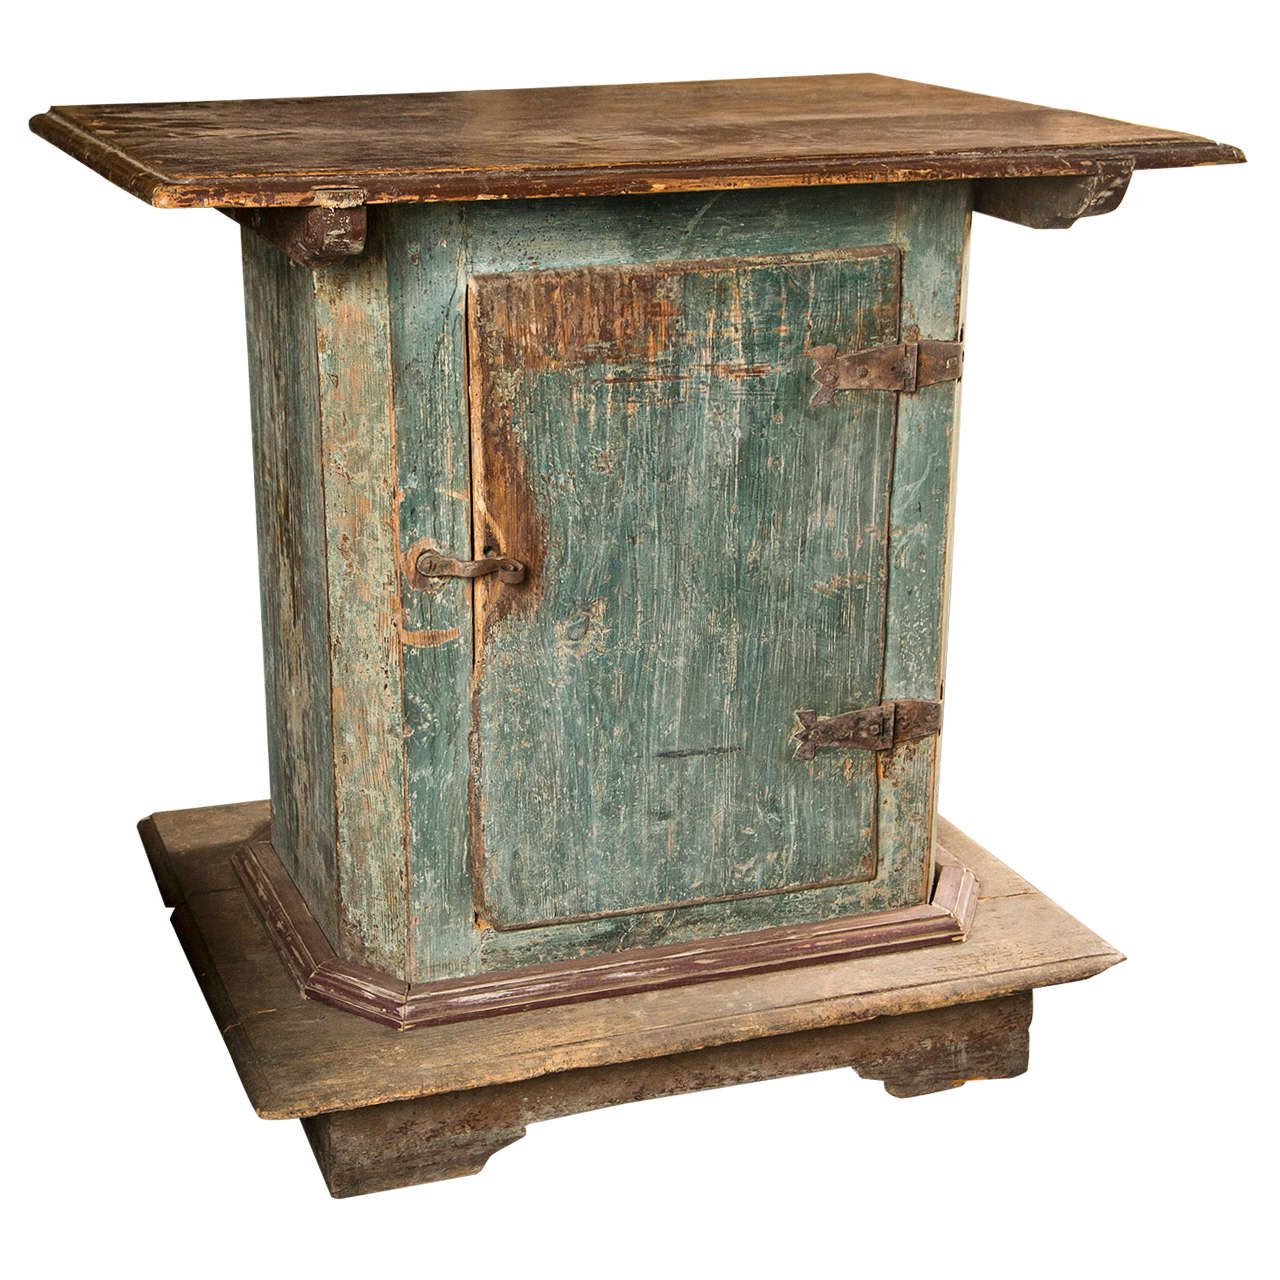 Swedish Painted Pedestal Cabinet with One Door in Original Paint Finish, c. 1780 For Sale